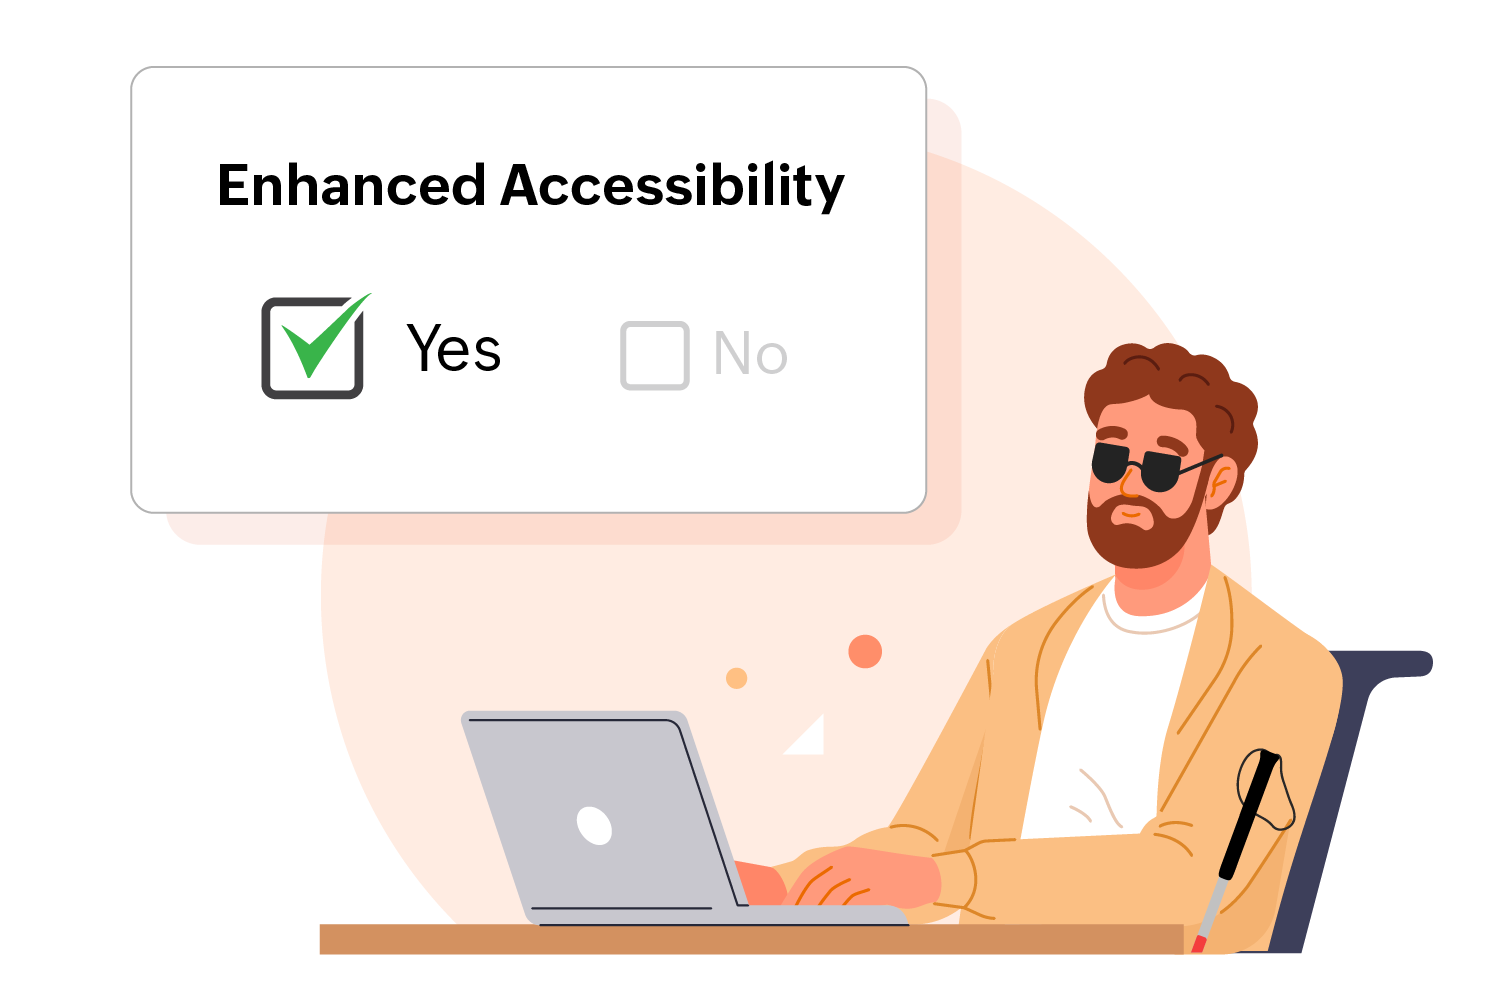 Enable accessibility